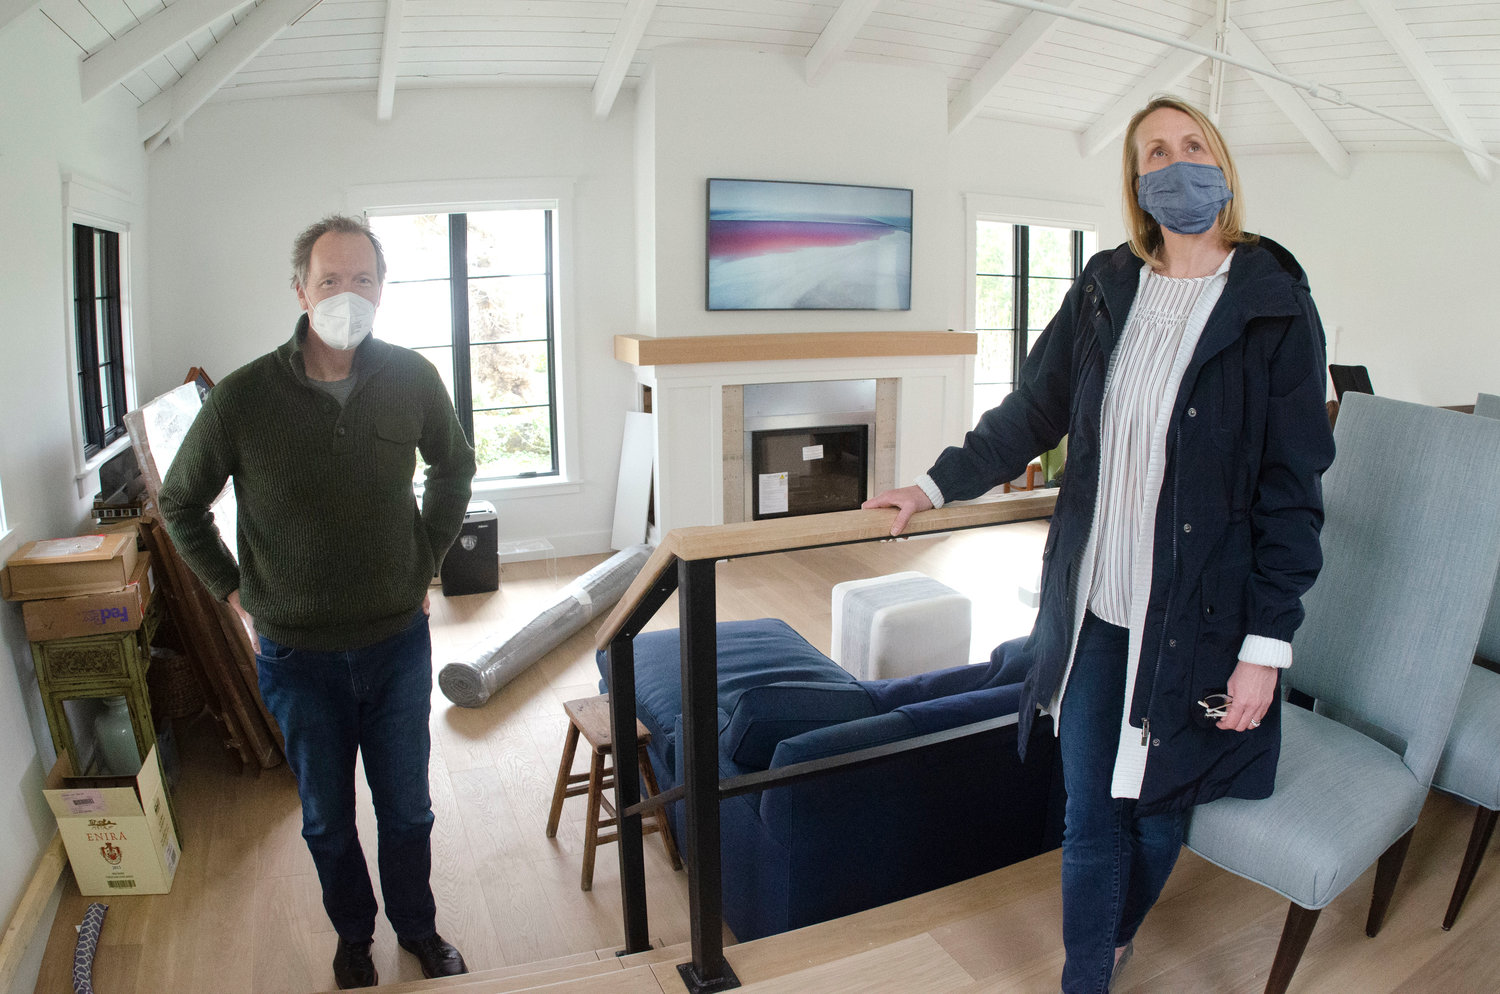 The Iseleibs are doing a major renovation of their new home, with the help of architect Cory Kallfelz (right).